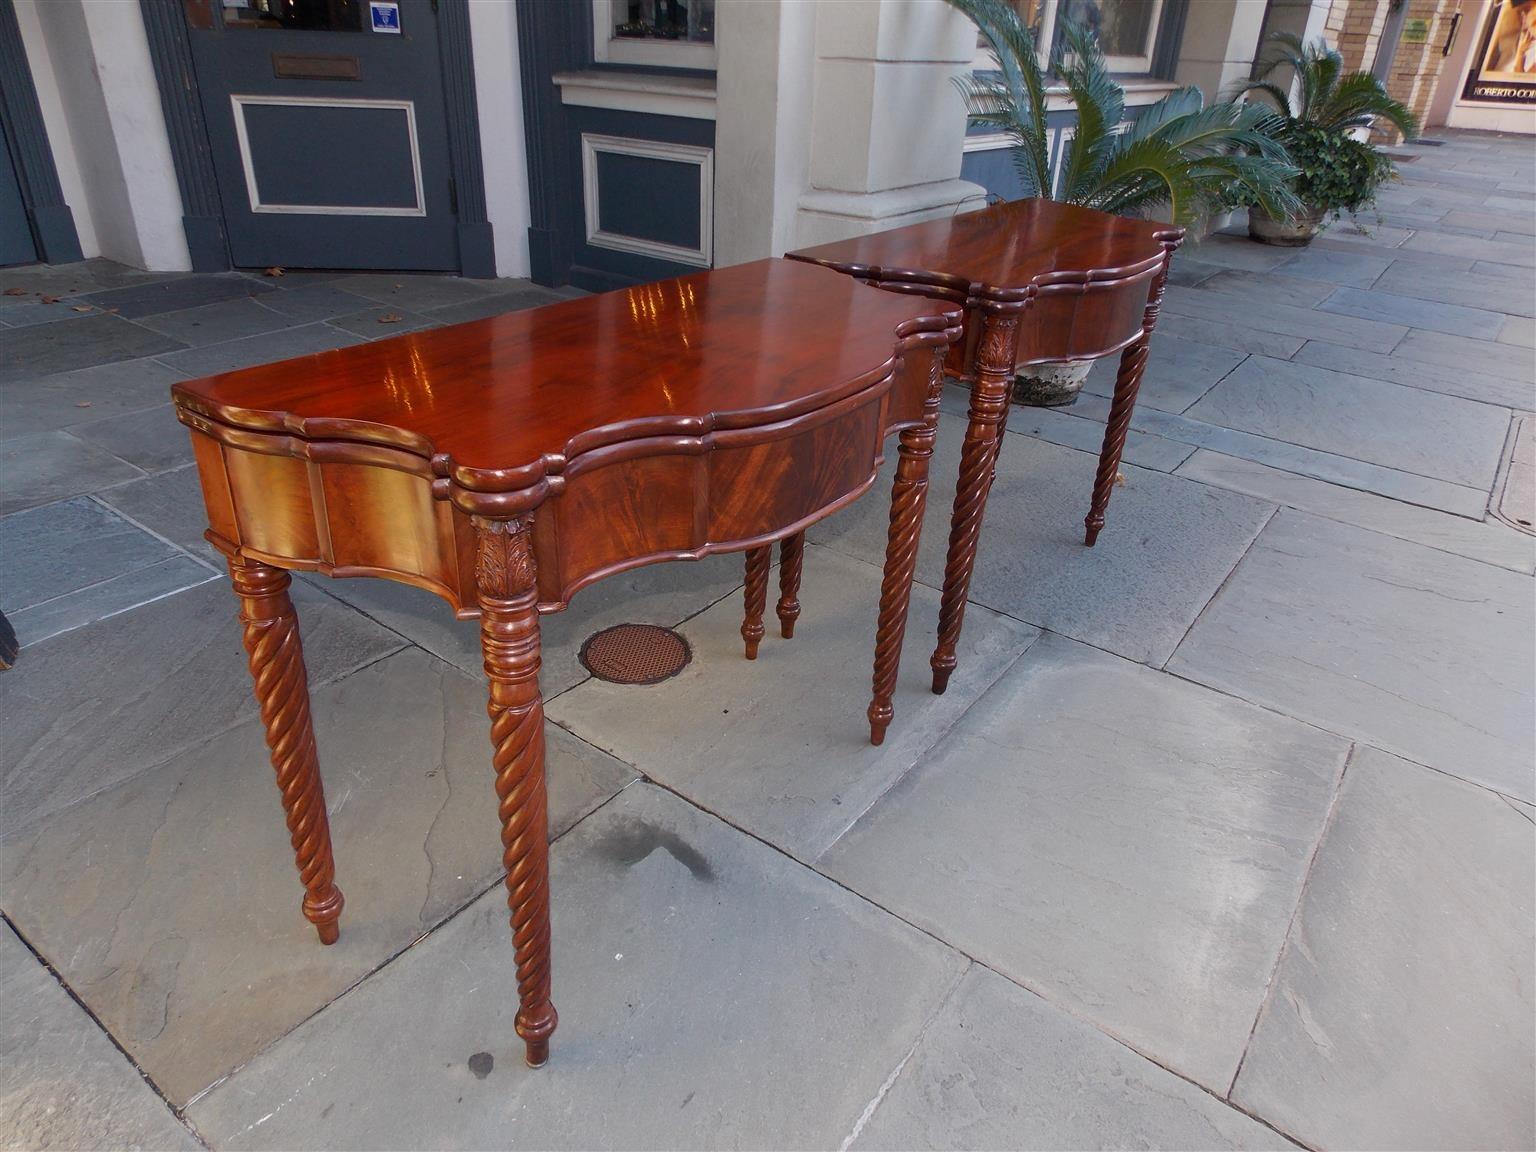 Pair of American Sheraton mahogany serpentine hinged top game tables with one board tops, outset corners with acanthus carved motif,  carved molded edge skirt, swivel hinged gate leg, and terminating on the original bulbous ringed barley twist legs,